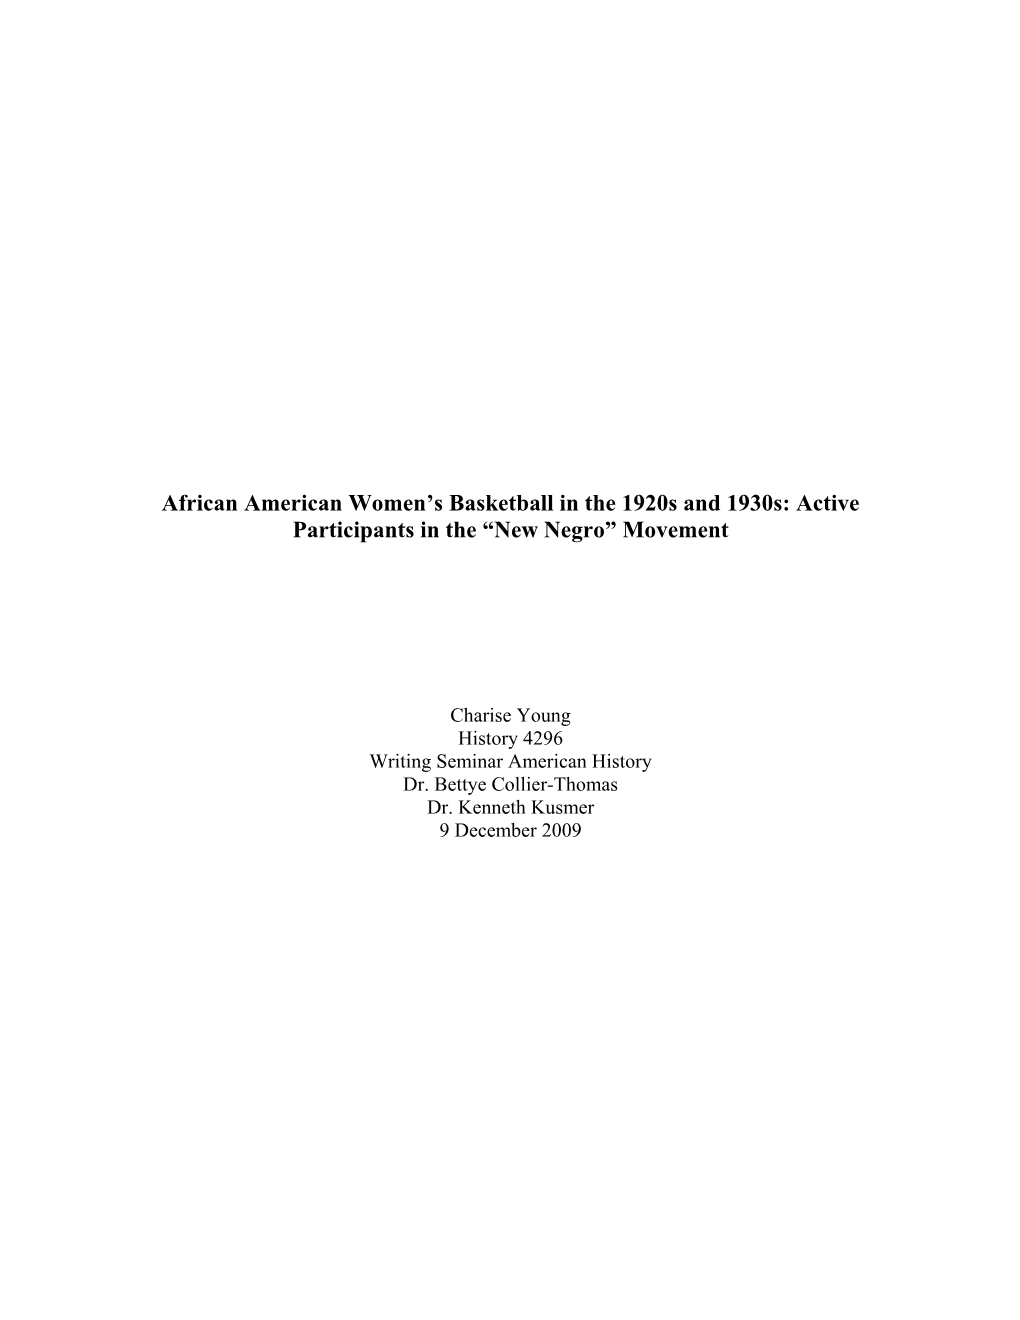 African American Women's Basketball in The